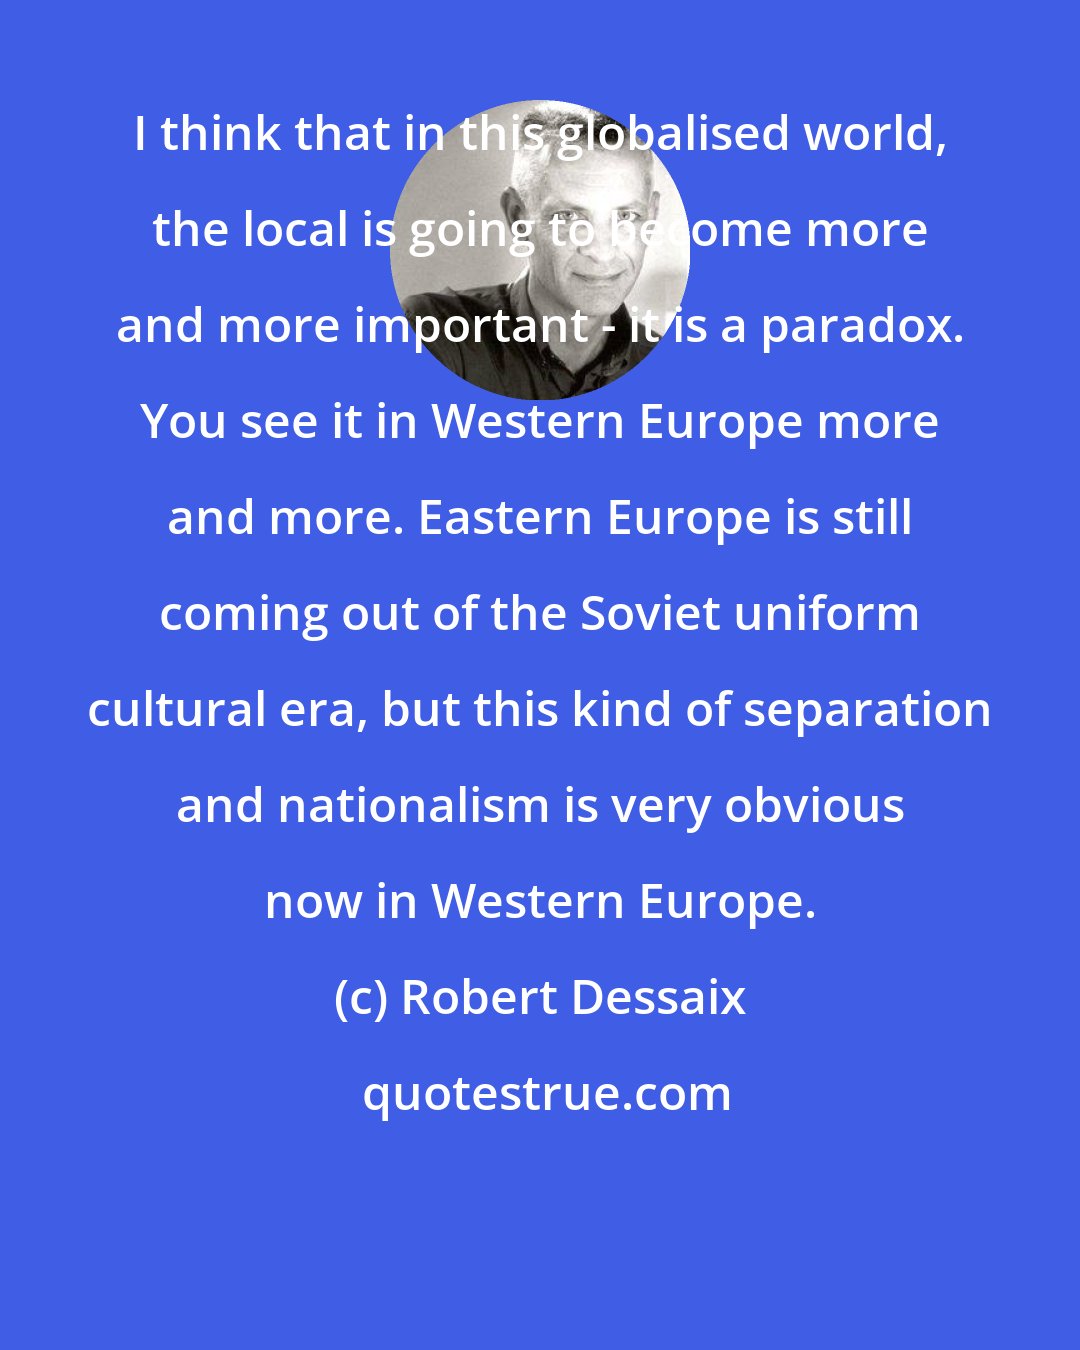 Robert Dessaix: I think that in this globalised world, the local is going to become more and more important - it is a paradox. You see it in Western Europe more and more. Eastern Europe is still coming out of the Soviet uniform cultural era, but this kind of separation and nationalism is very obvious now in Western Europe.